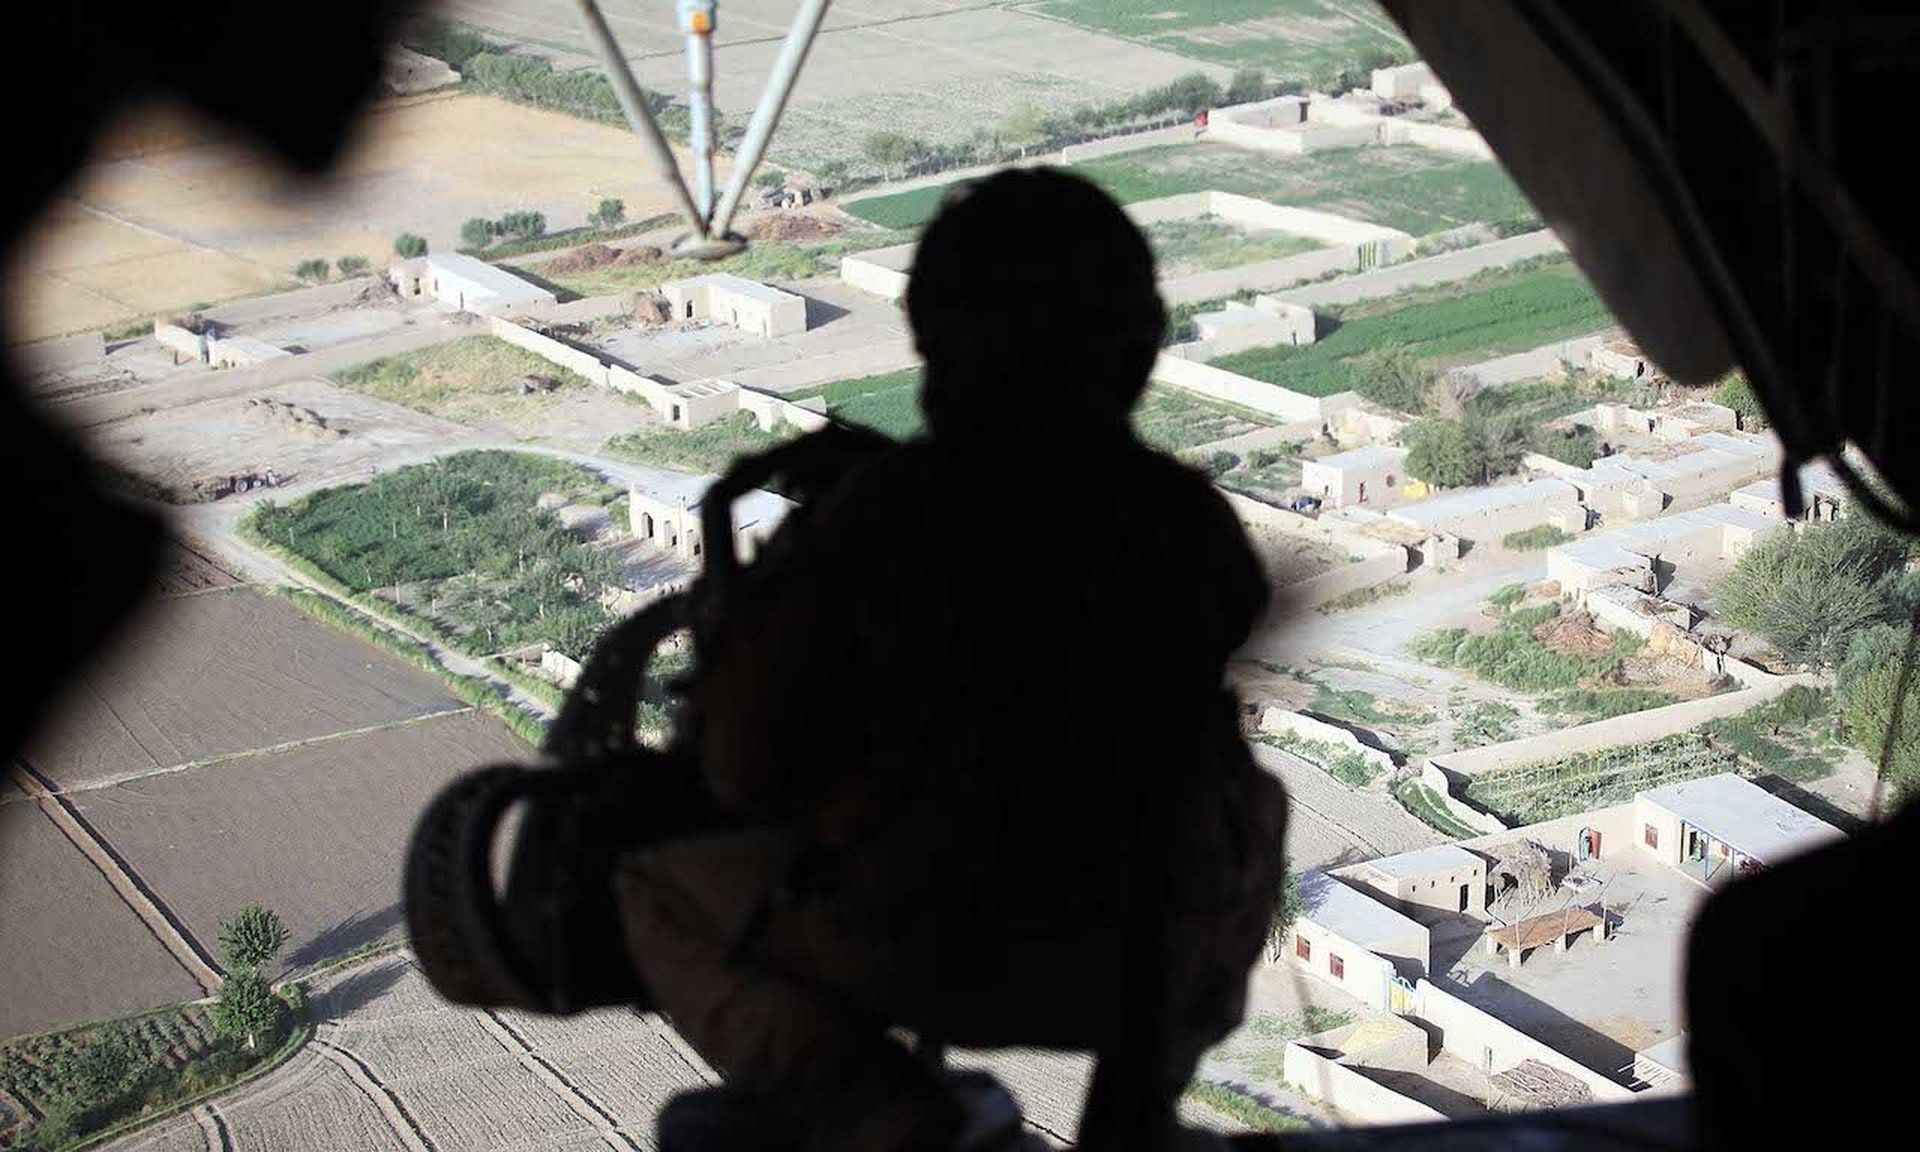 The rear gunner on a U.S. Marine helicopter keeps watch as they fly Marines from 2nd Marine Expeditionary Brigade, RCT 2nd Battalion 8th Marines Echo Co. to their location during the start of Operation Khanjari on July 2, 2009 in Afghanistan. Today’s columnist, Tom Gorup of Alert Logic fought in Afghanistan and says while there’s more time to react...